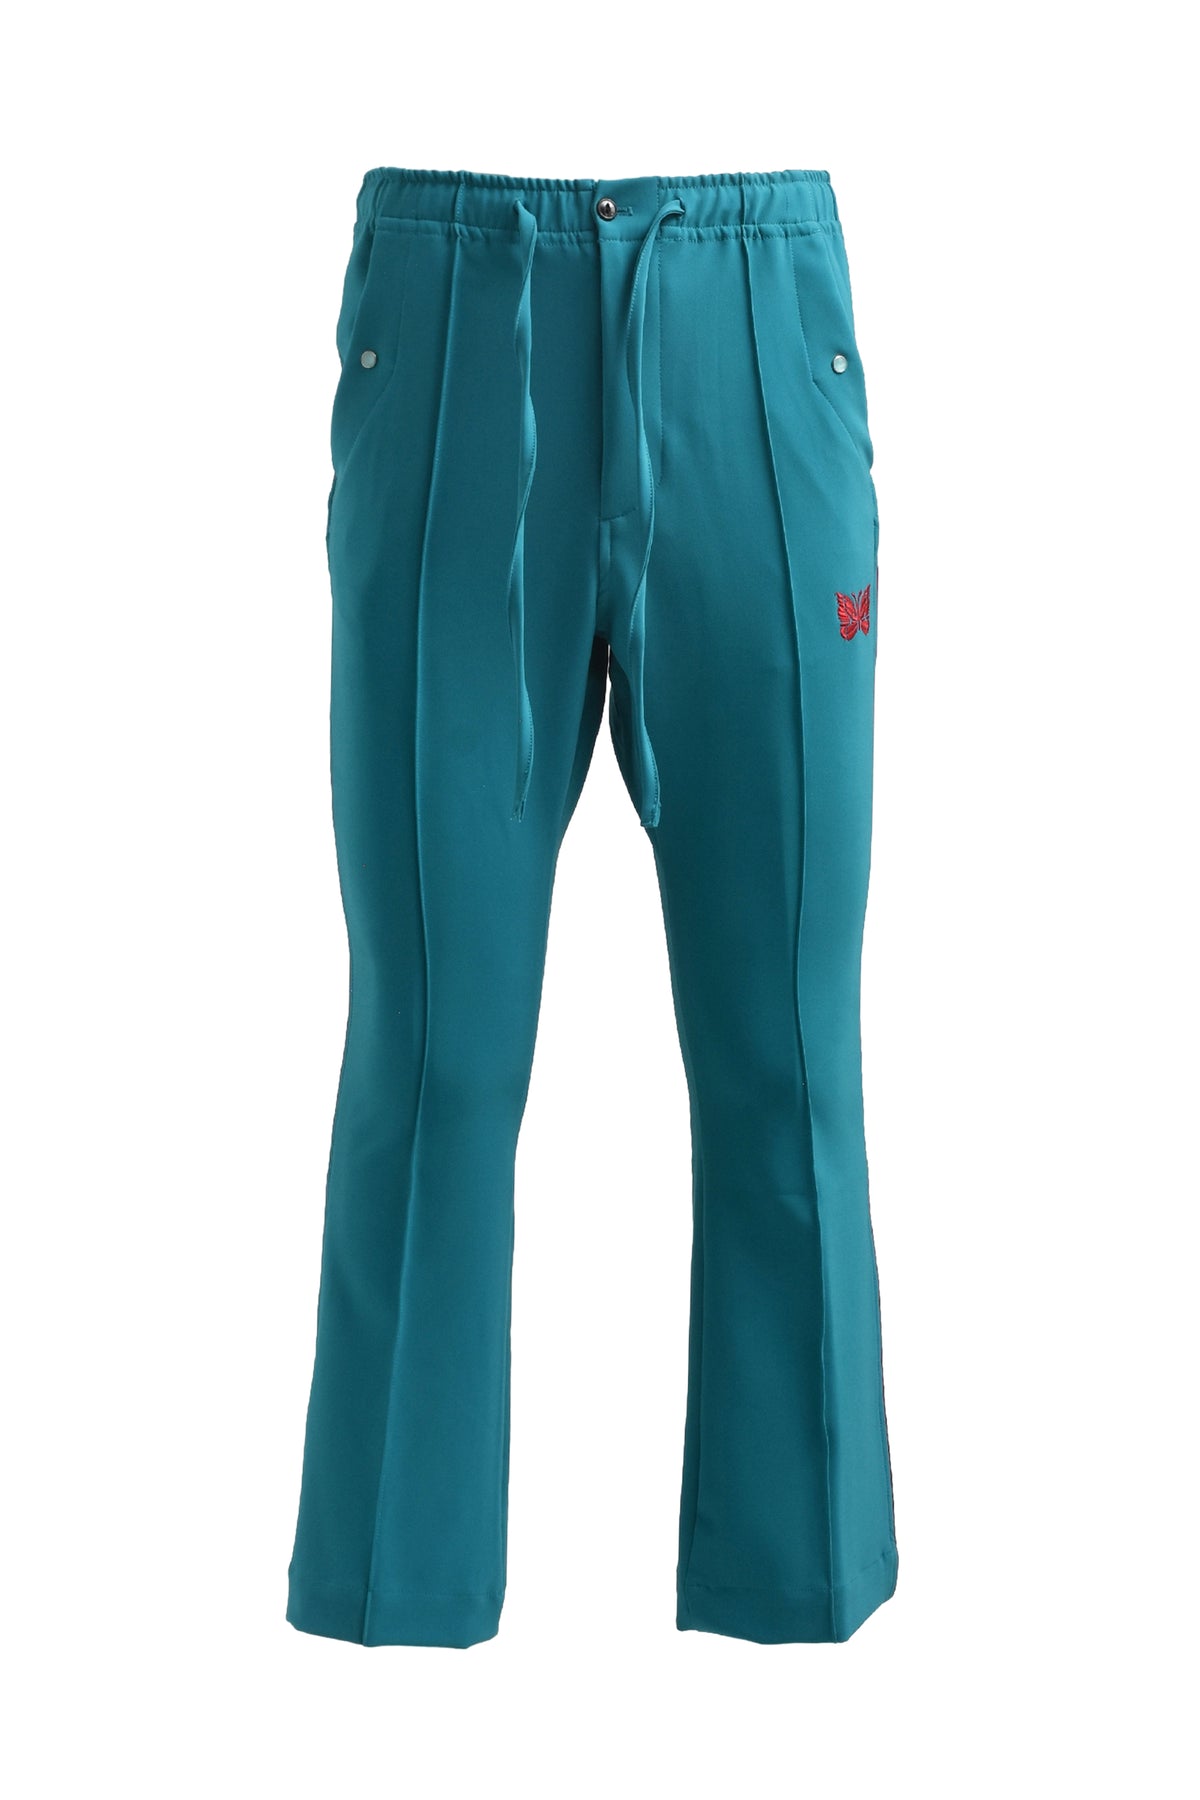 PIPING COWBOY PANT - PE/PU DOUBLE CLOTH / TURQUOISE